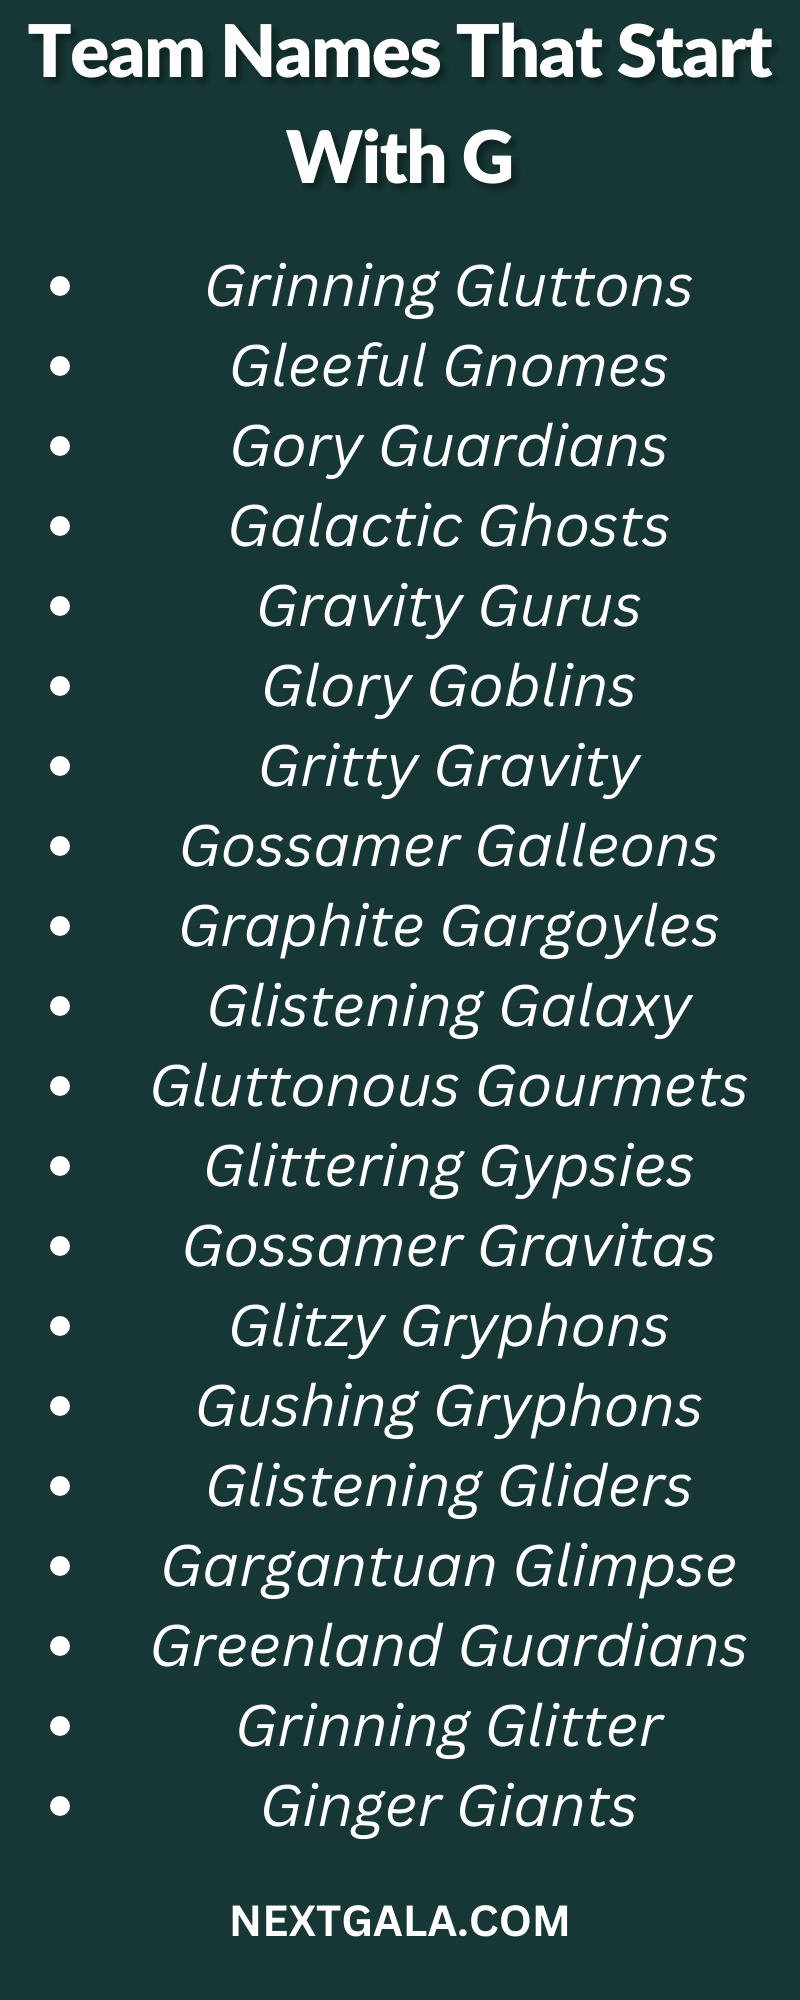 Team Names That Start With G